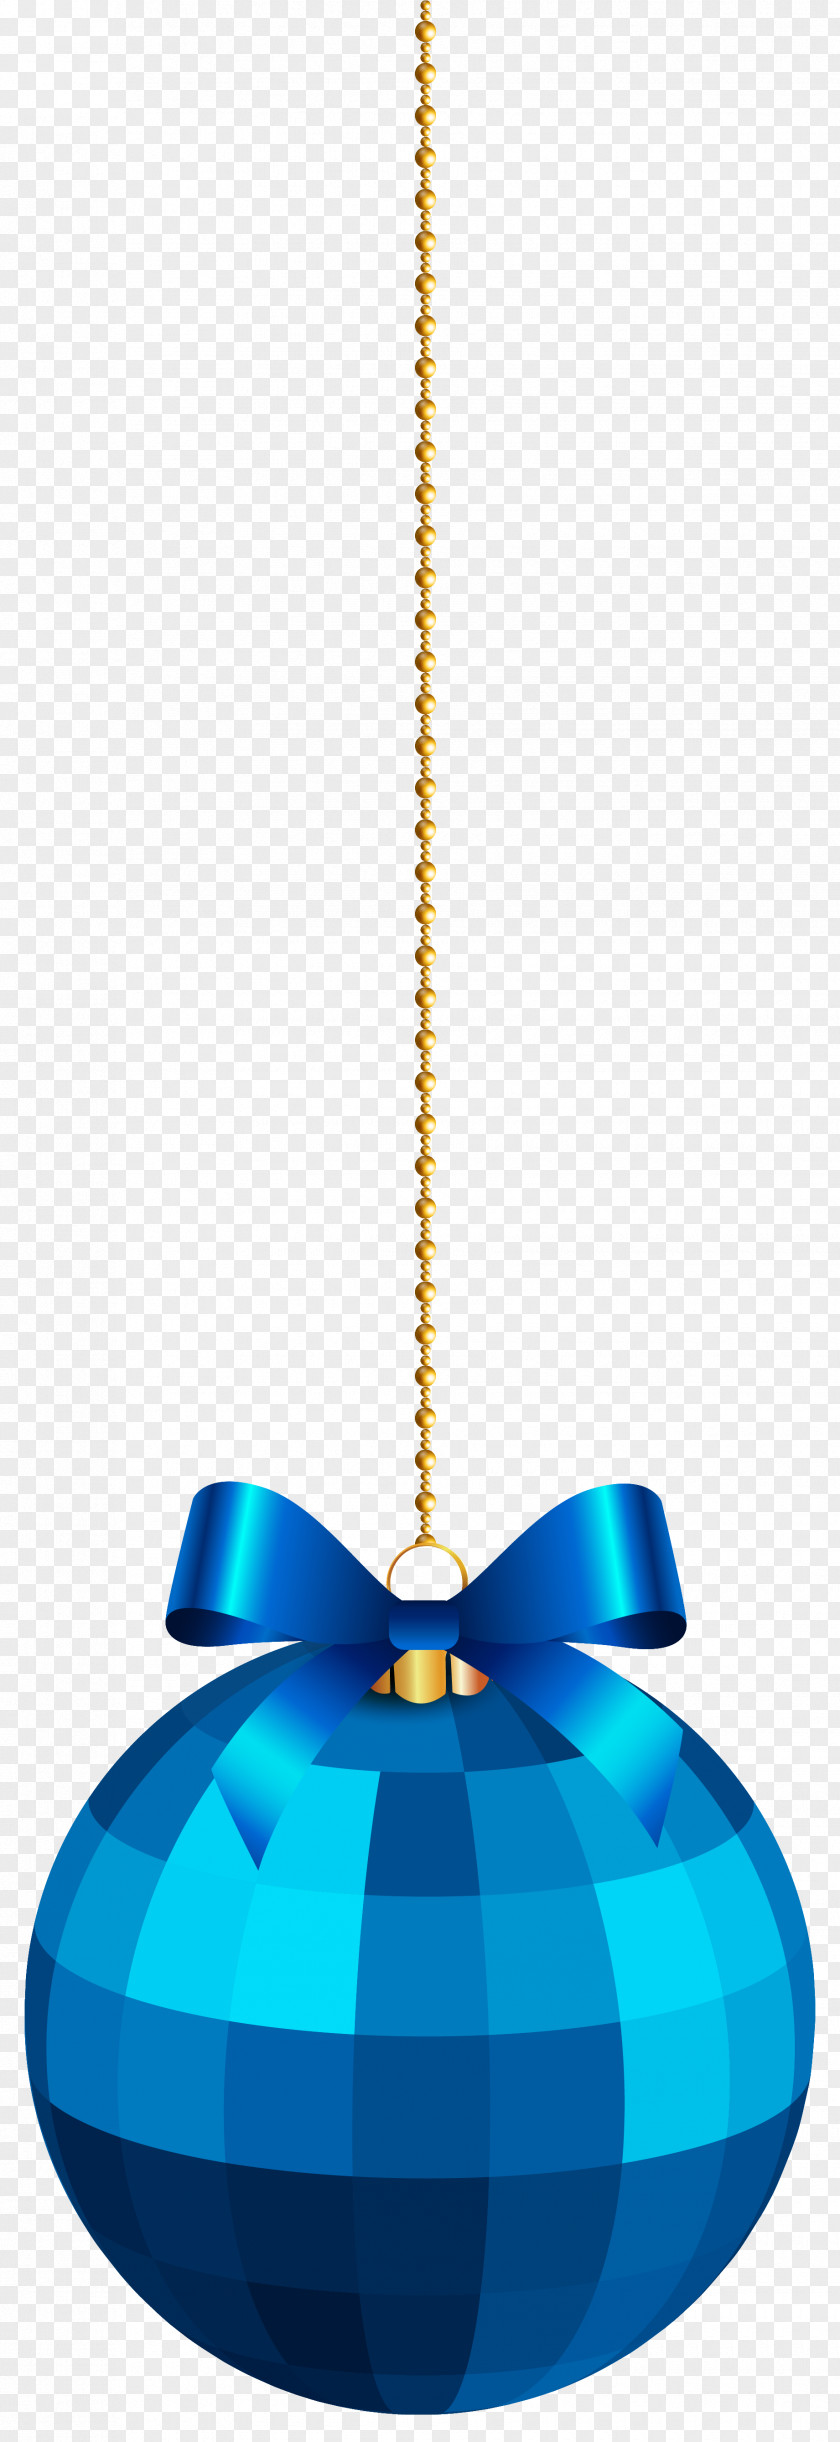 Hanging Blue Christmas Ball With Bow Clipart Image Ornament Decoration Clip Art PNG